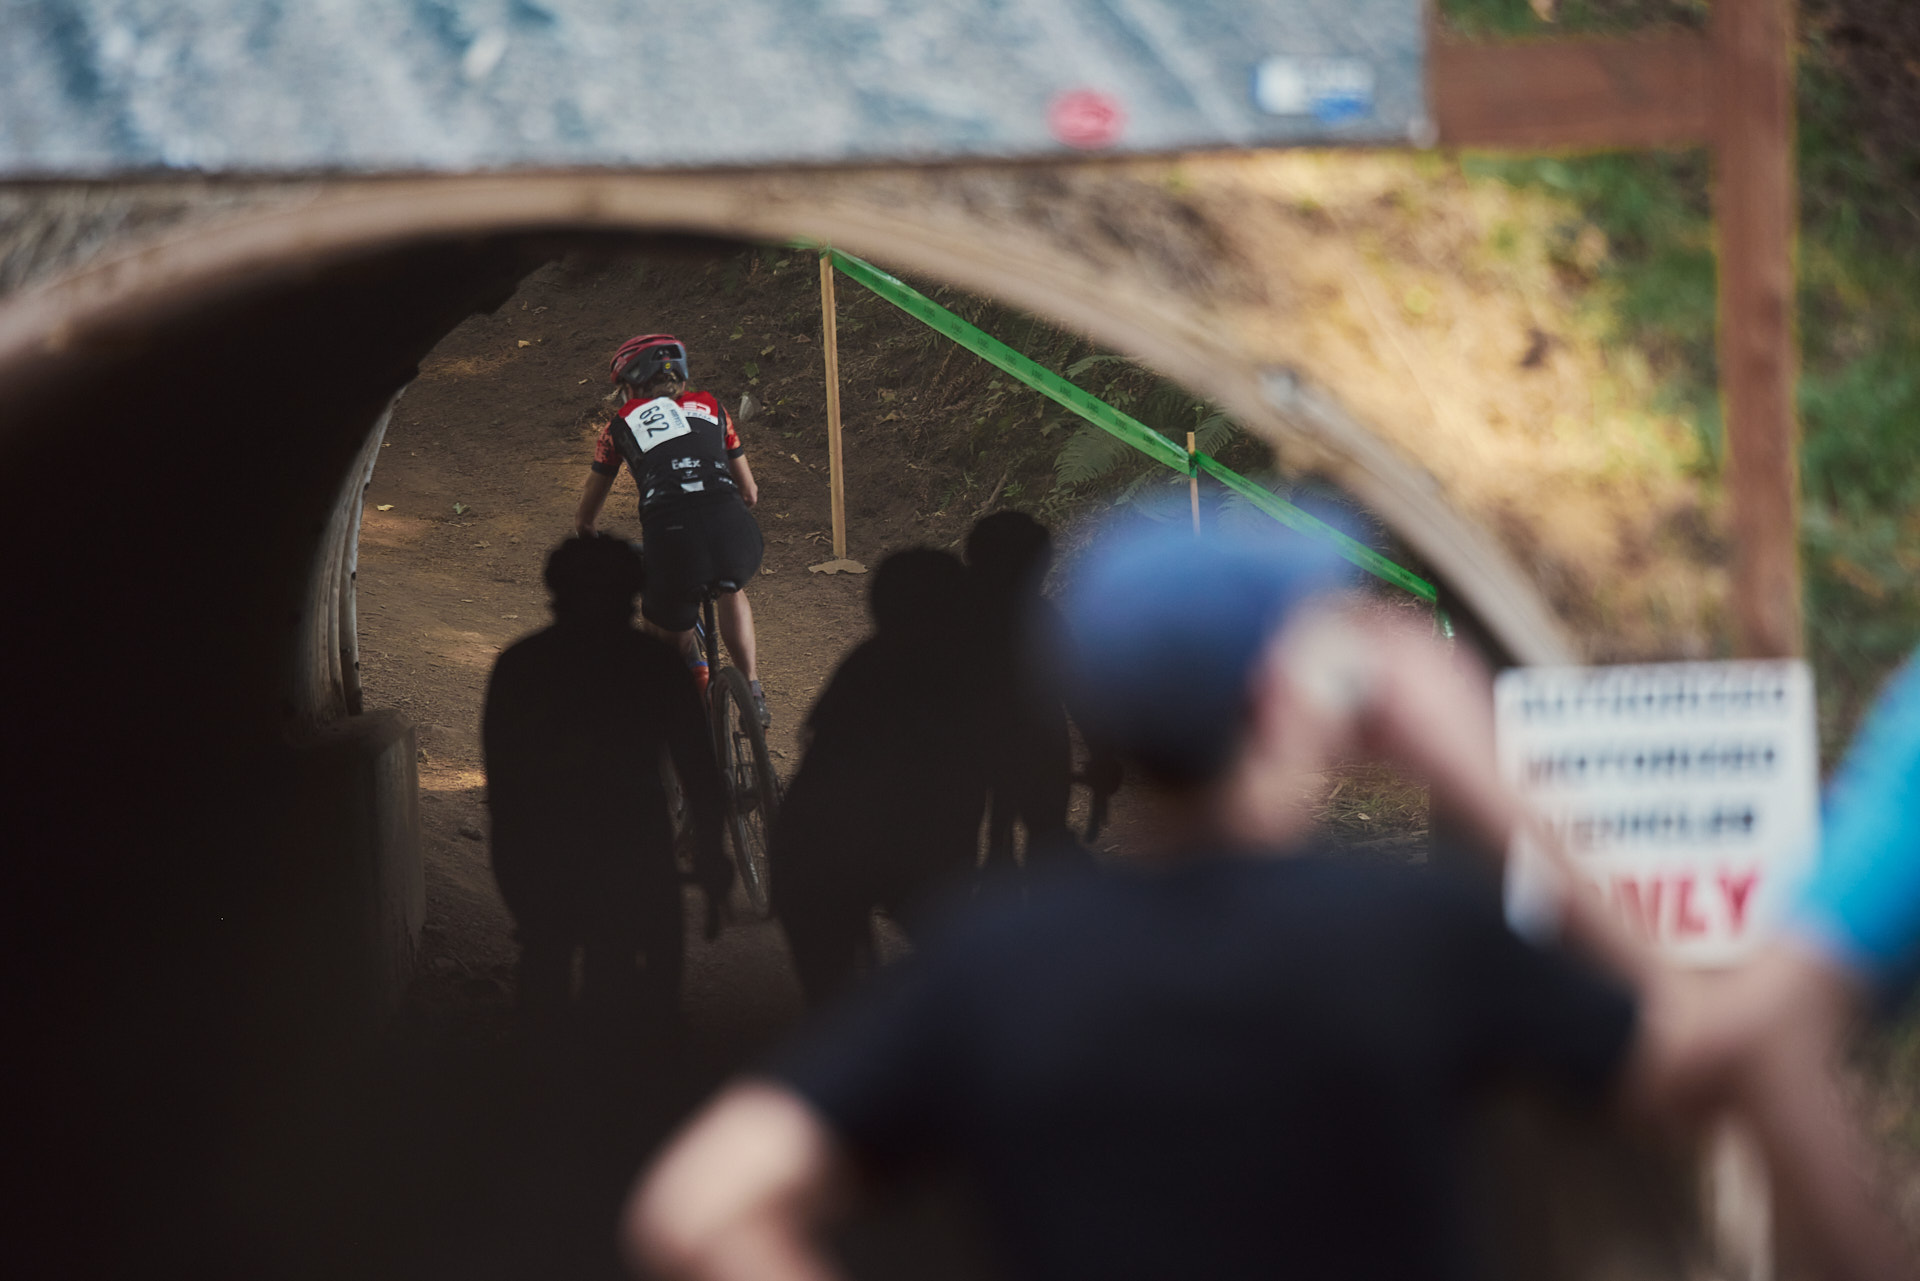 Harvest Cyclocross Series: Washougal MX Day #1